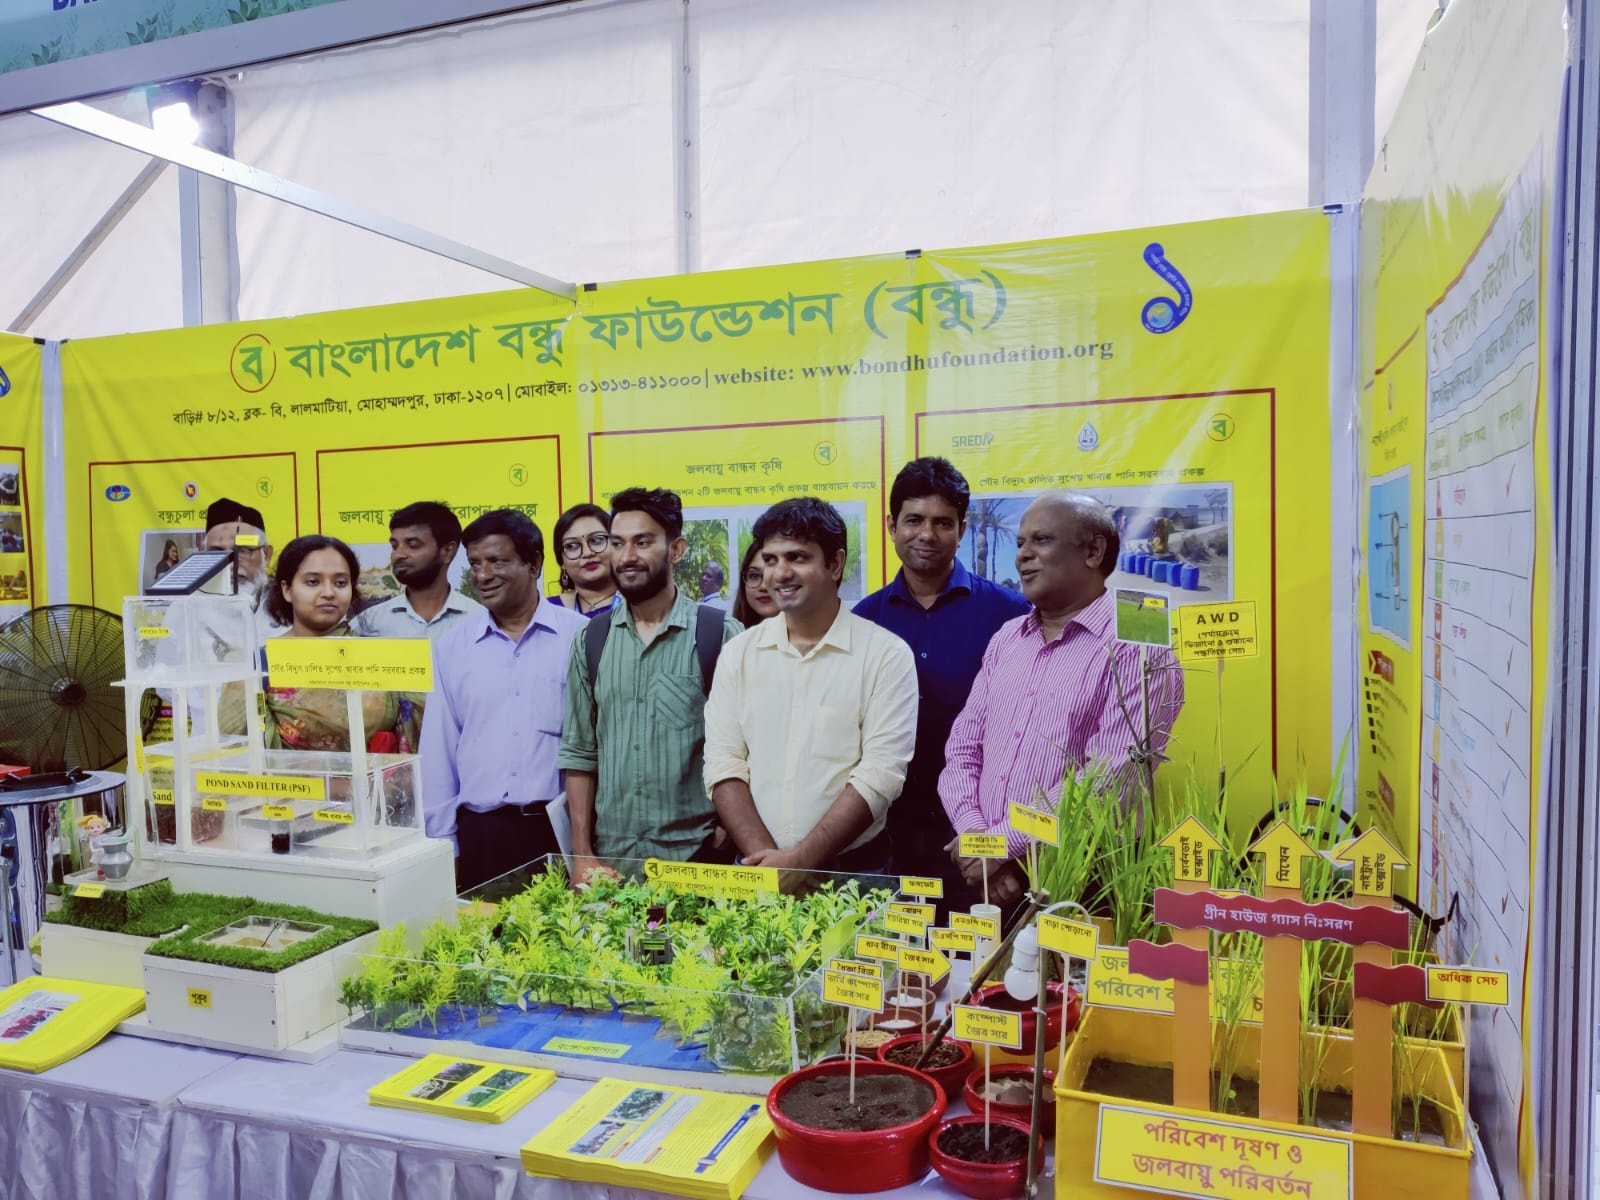 BONDHU took part in the Environment Fair 2022 with a dedicated stall